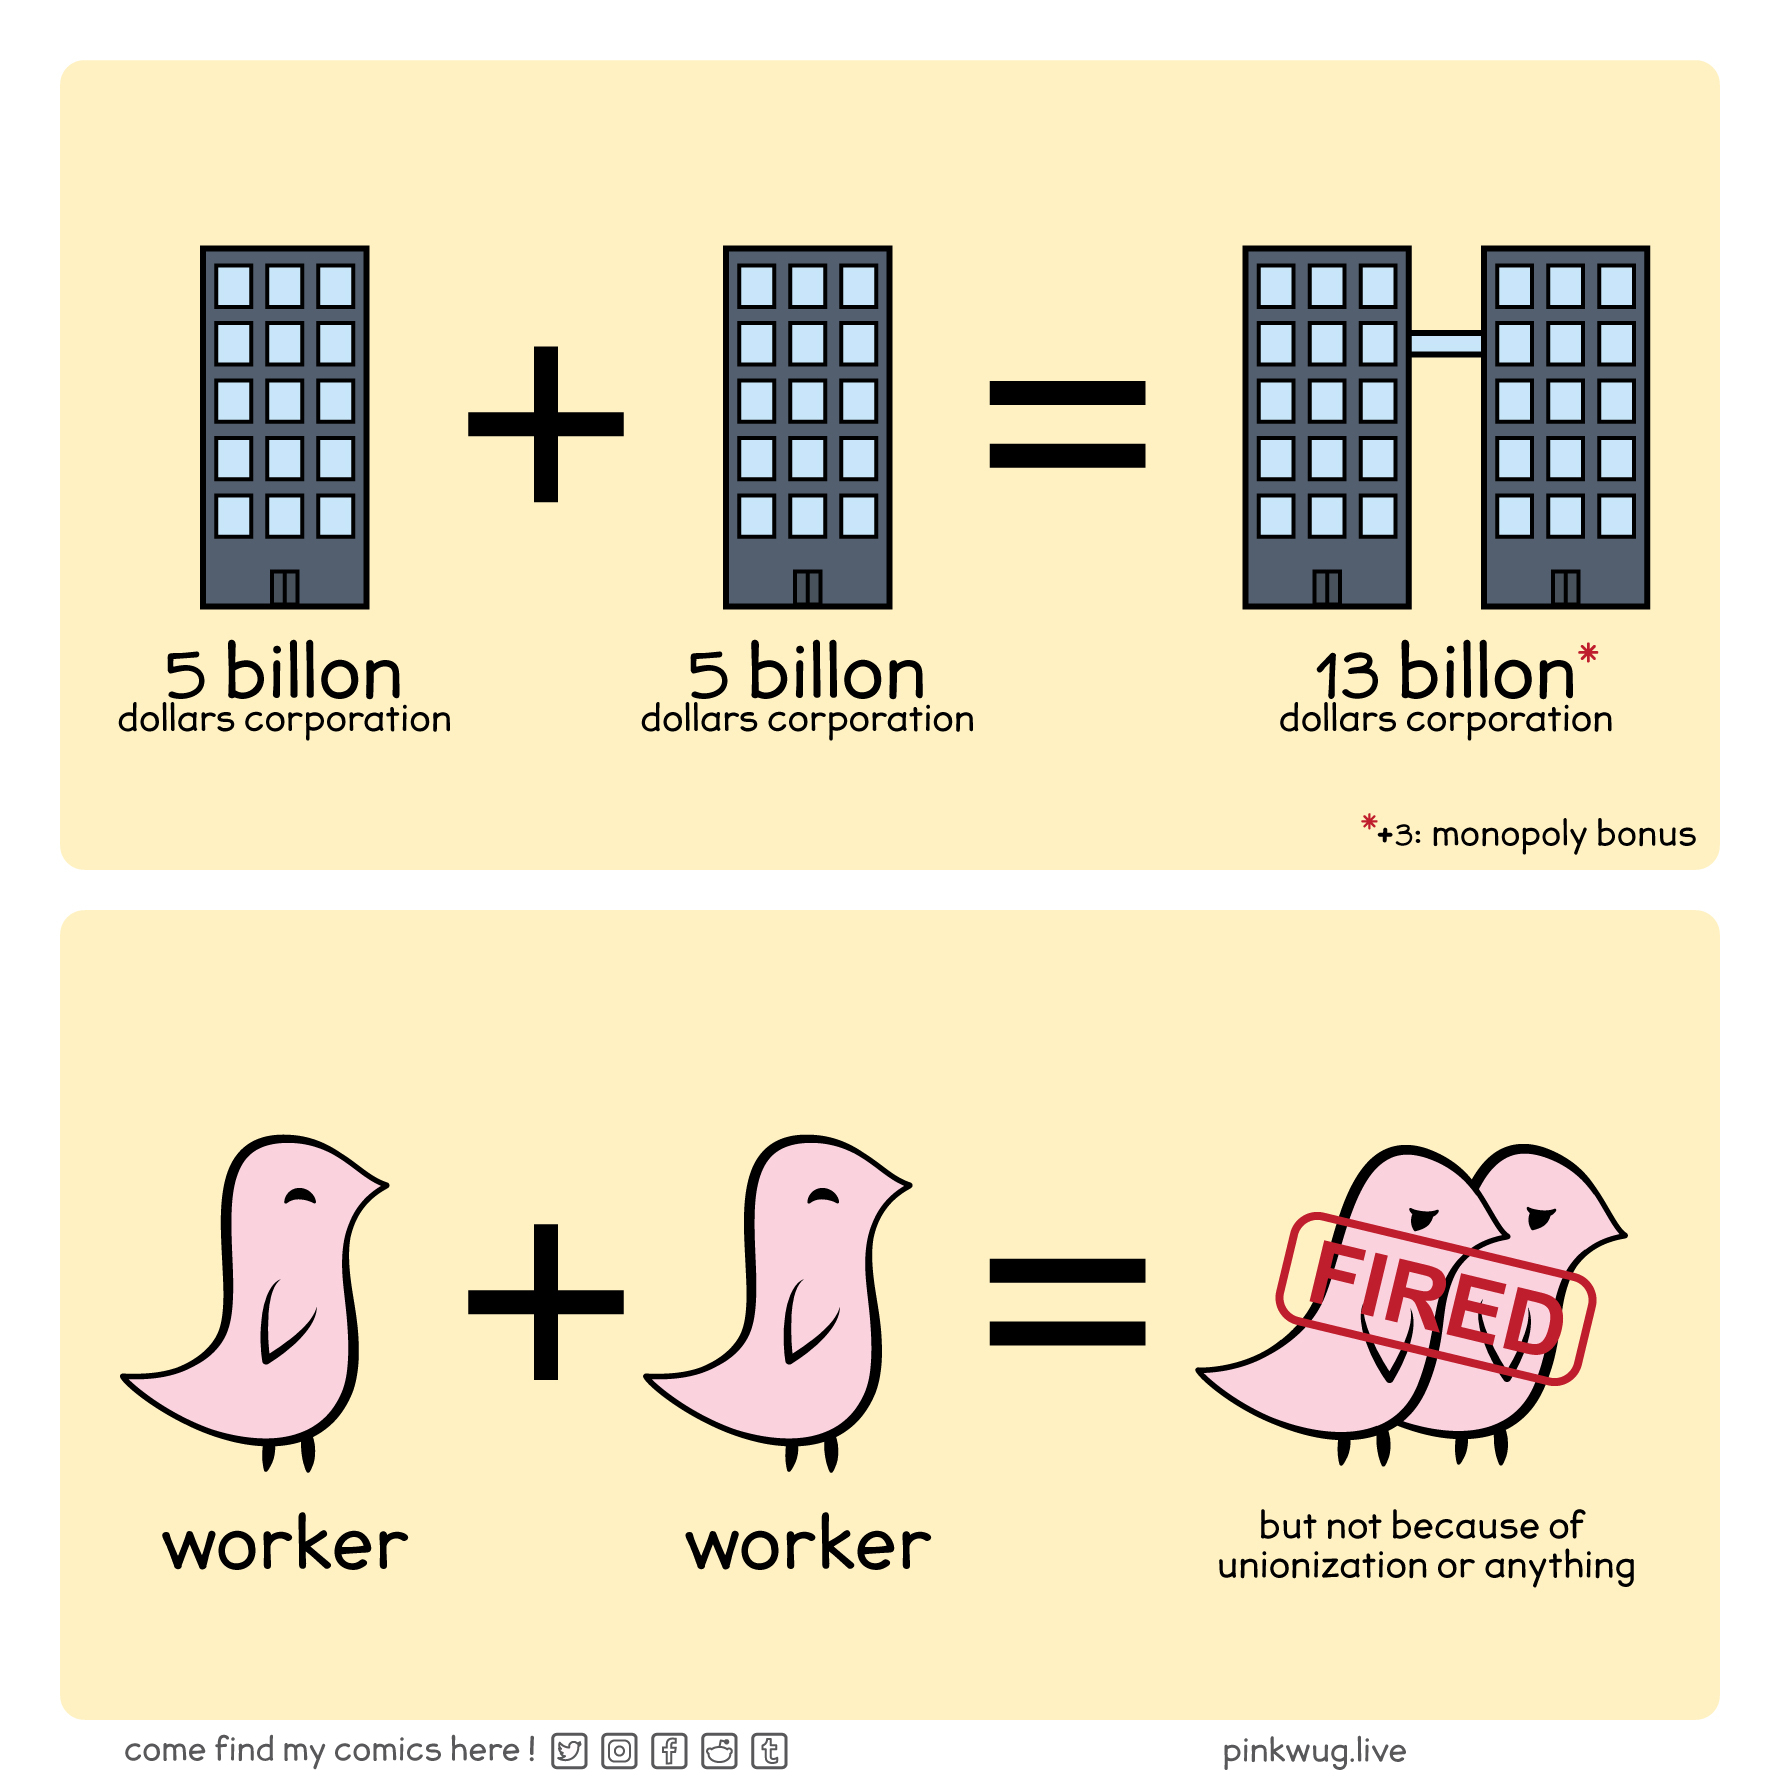 pinkwug comic: 5 billion dollar corporation + 5 billion dollar corporation = 13 billion dollar corporation (+3: monopoly bonus).

worker + worker = both fired (but not because of unionization or anything)